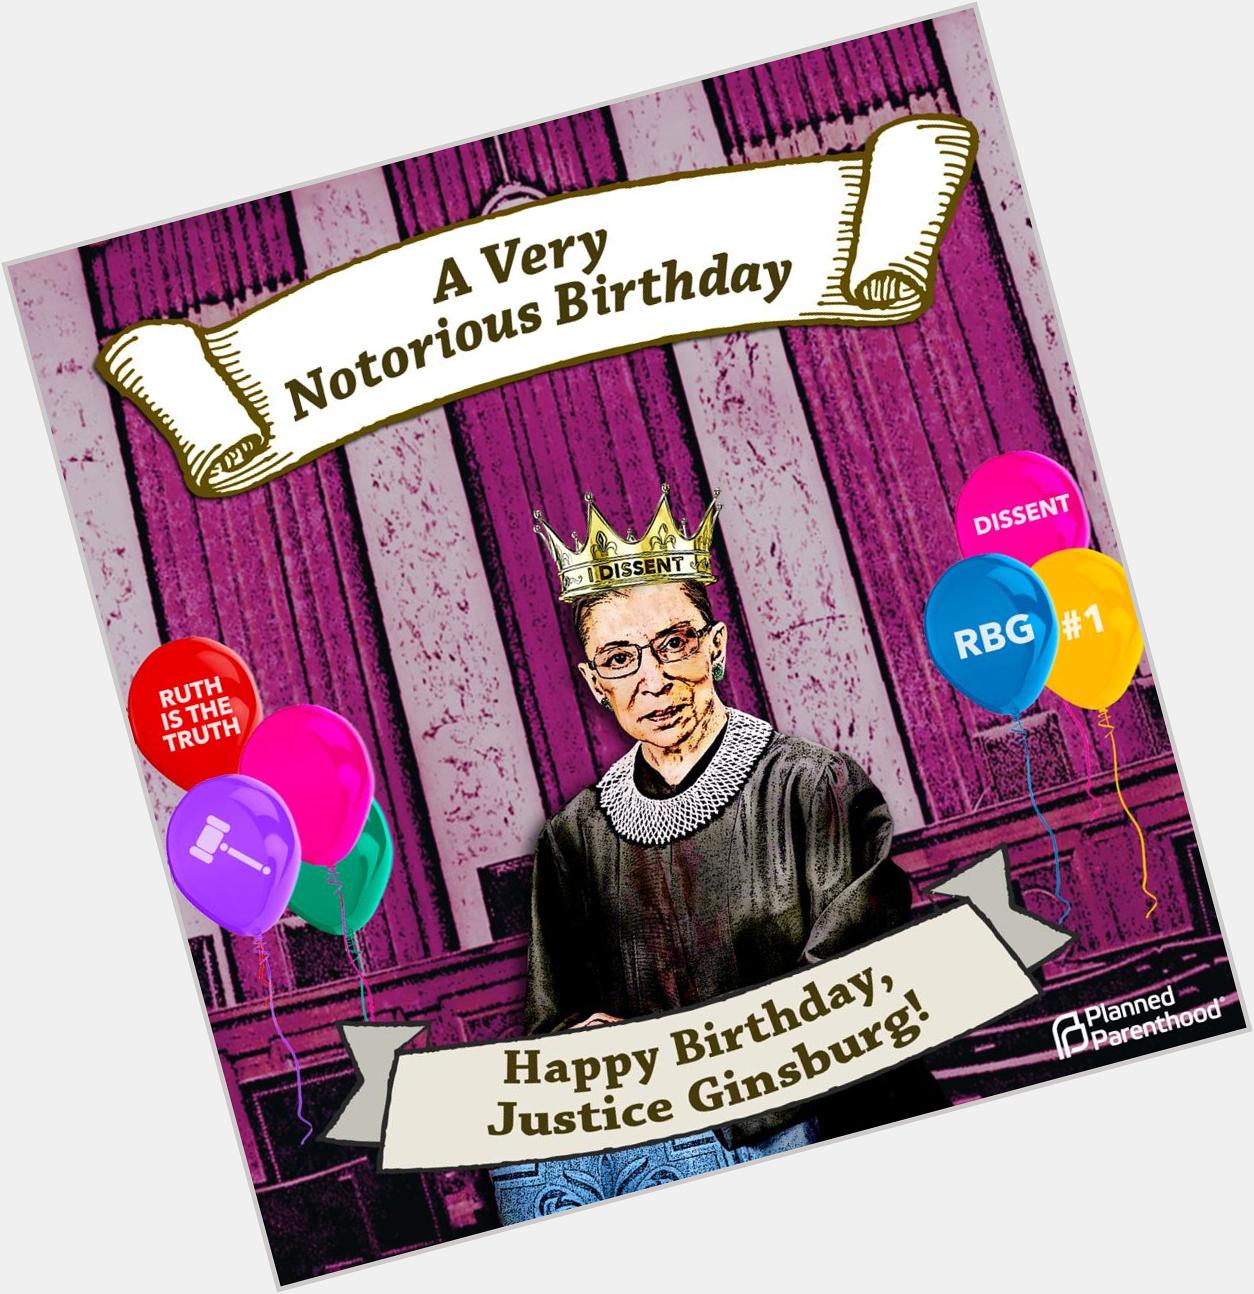  Fierce. Fabulous. Notorious.
HAPPY BIRTHDAY, Justice Ruth Bader Ginsburg!  